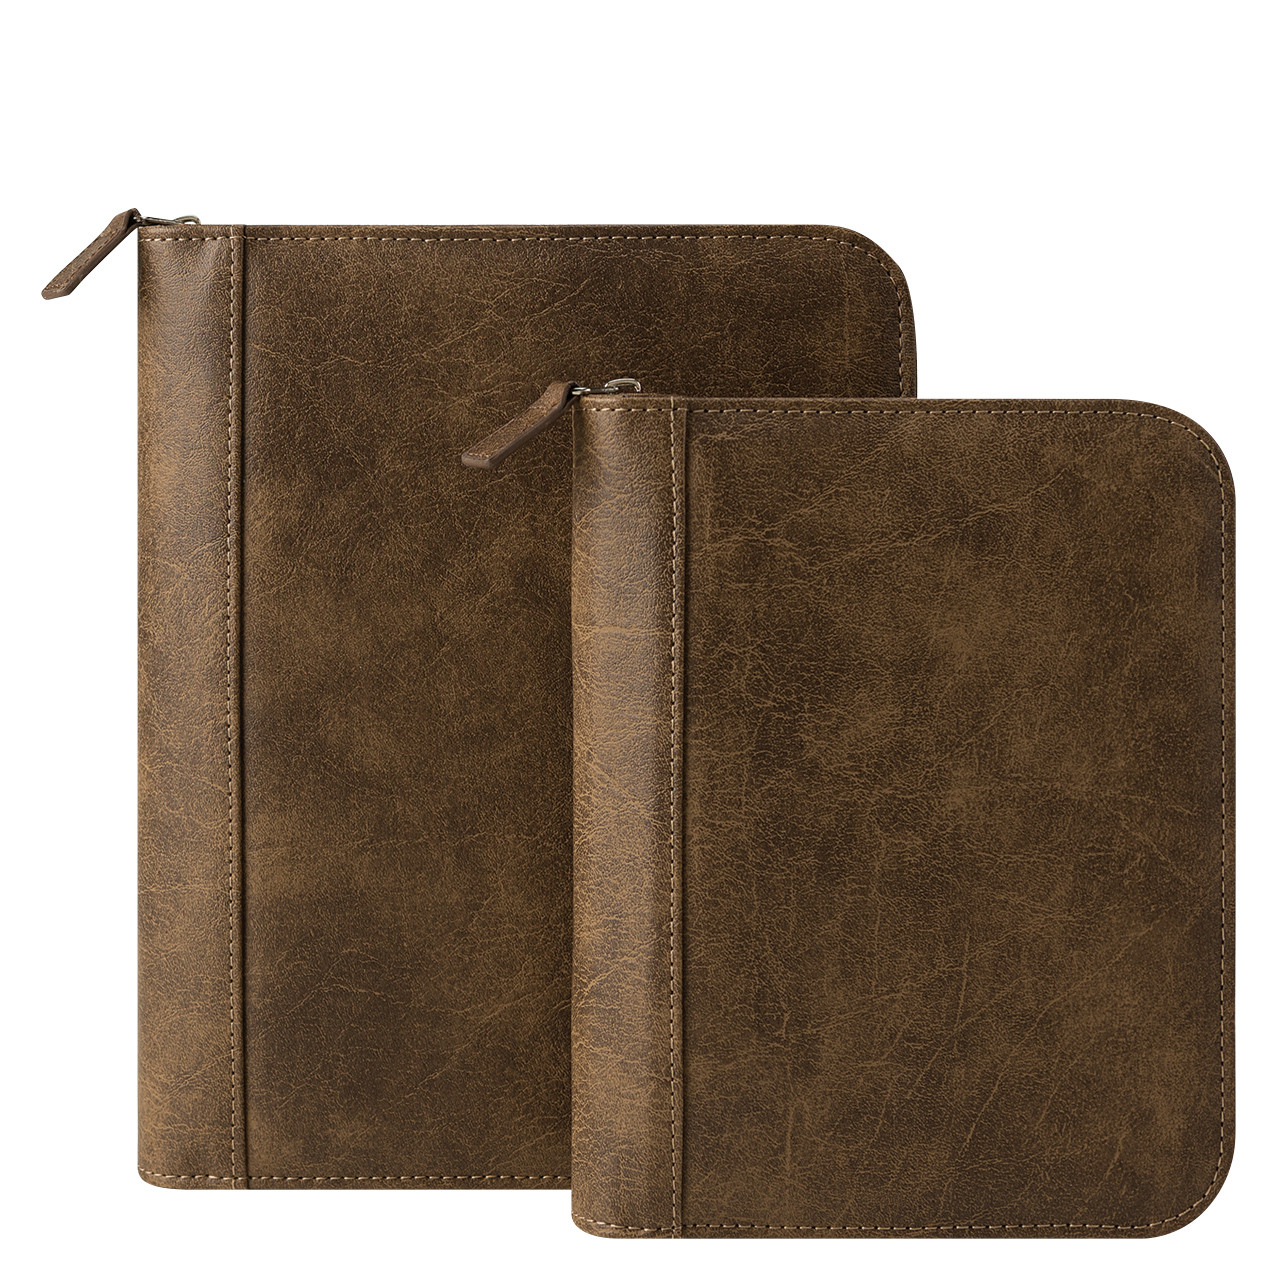 Franklin Covey Leather Ava Binder